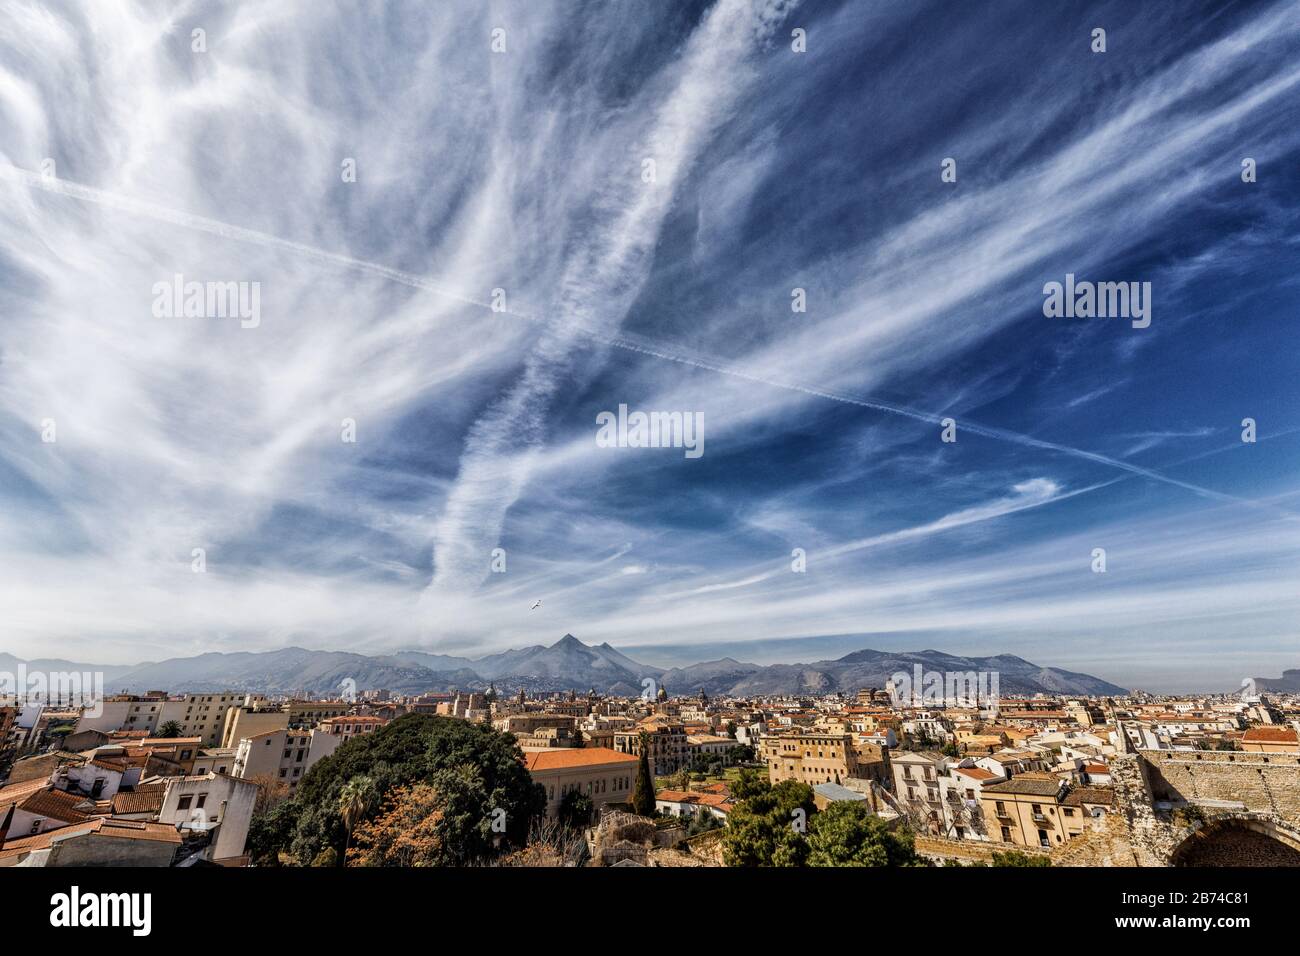 Geoengineering, chemtrails, weather control, HAARP, man-made cloud formations above Palermo city, Sicily, March 2020 Stock Photo